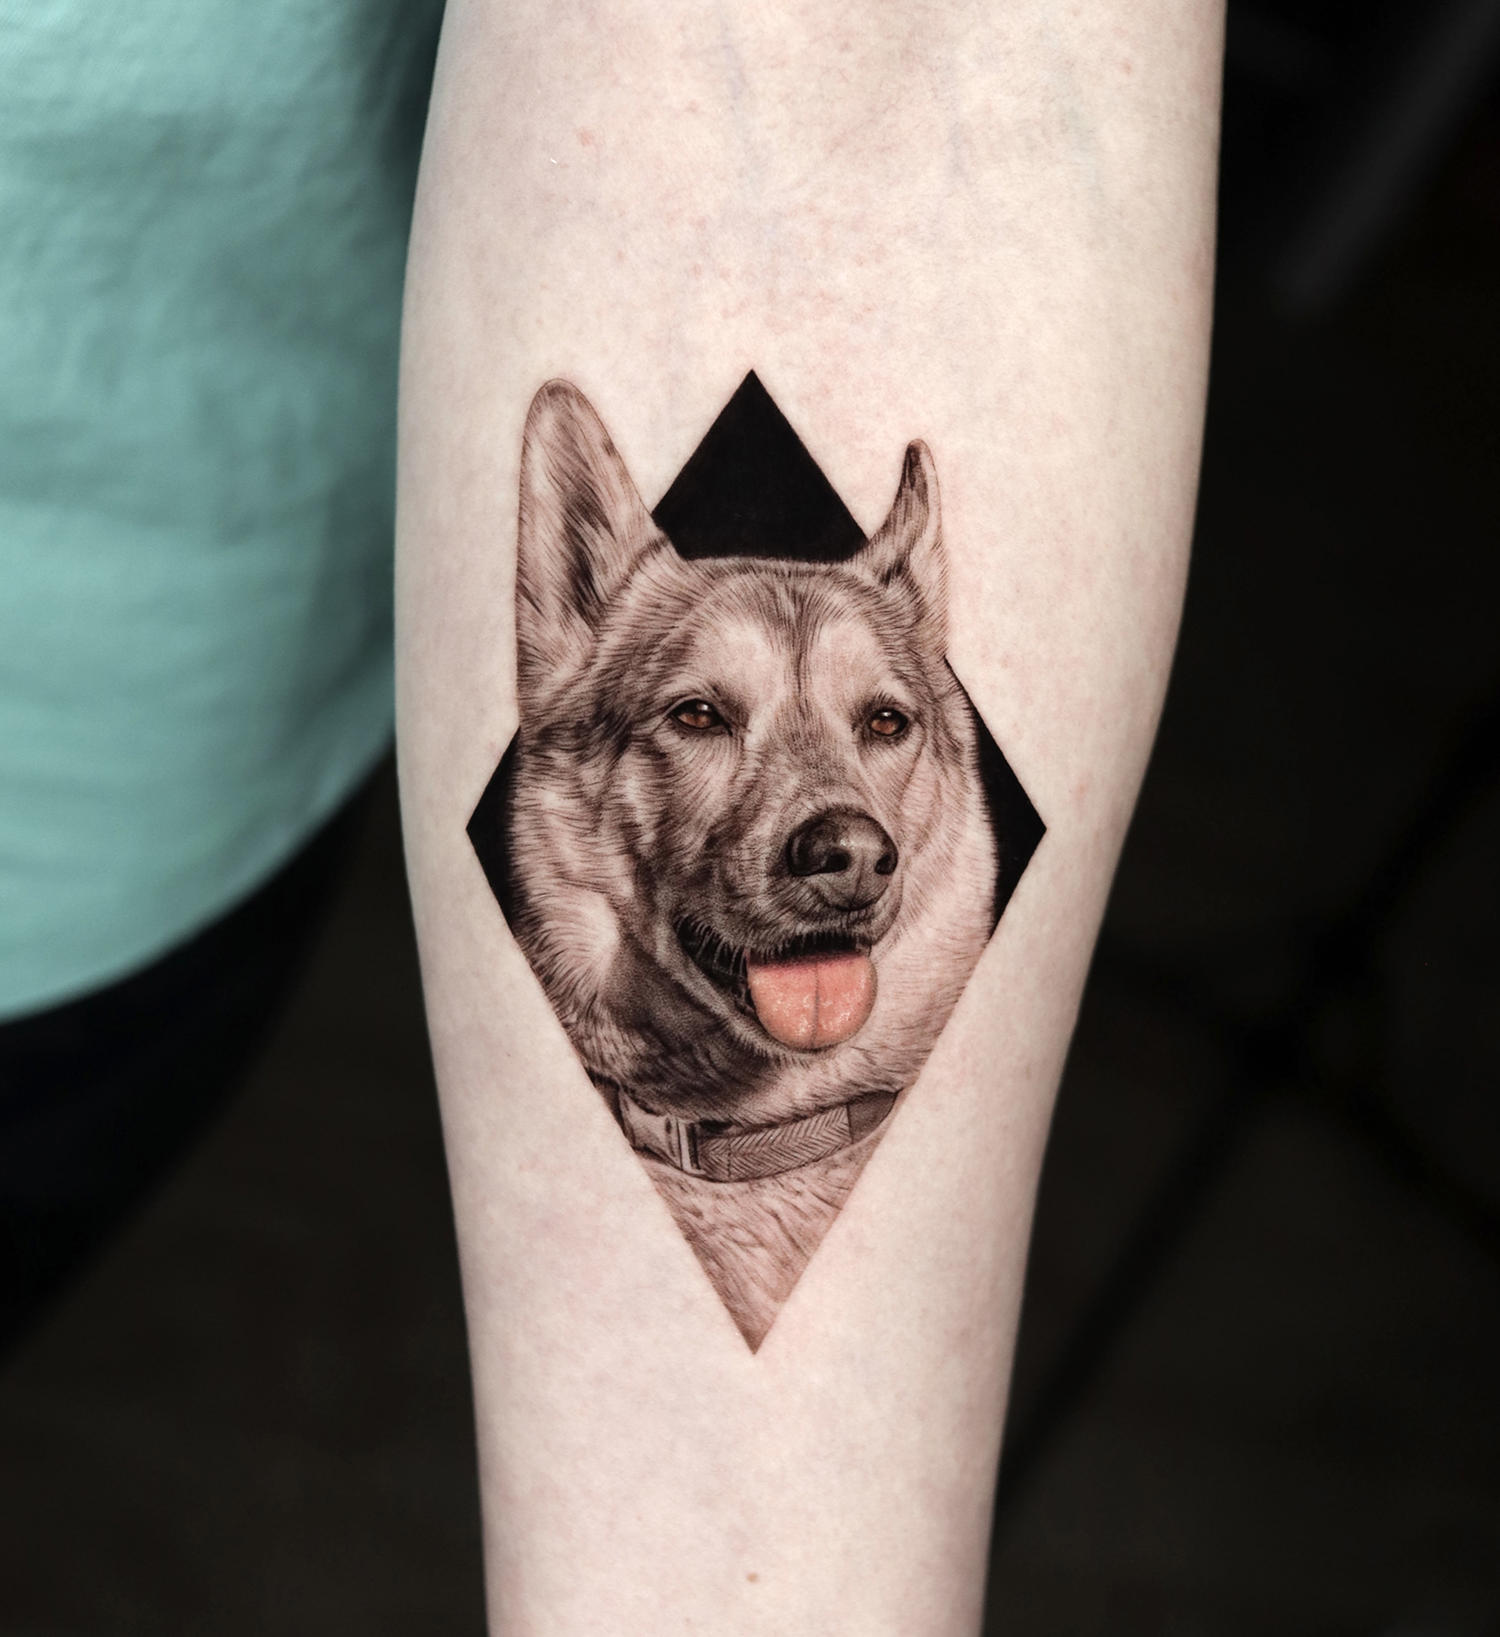 A micro-realism tattoo of a German shepherd that is flawless